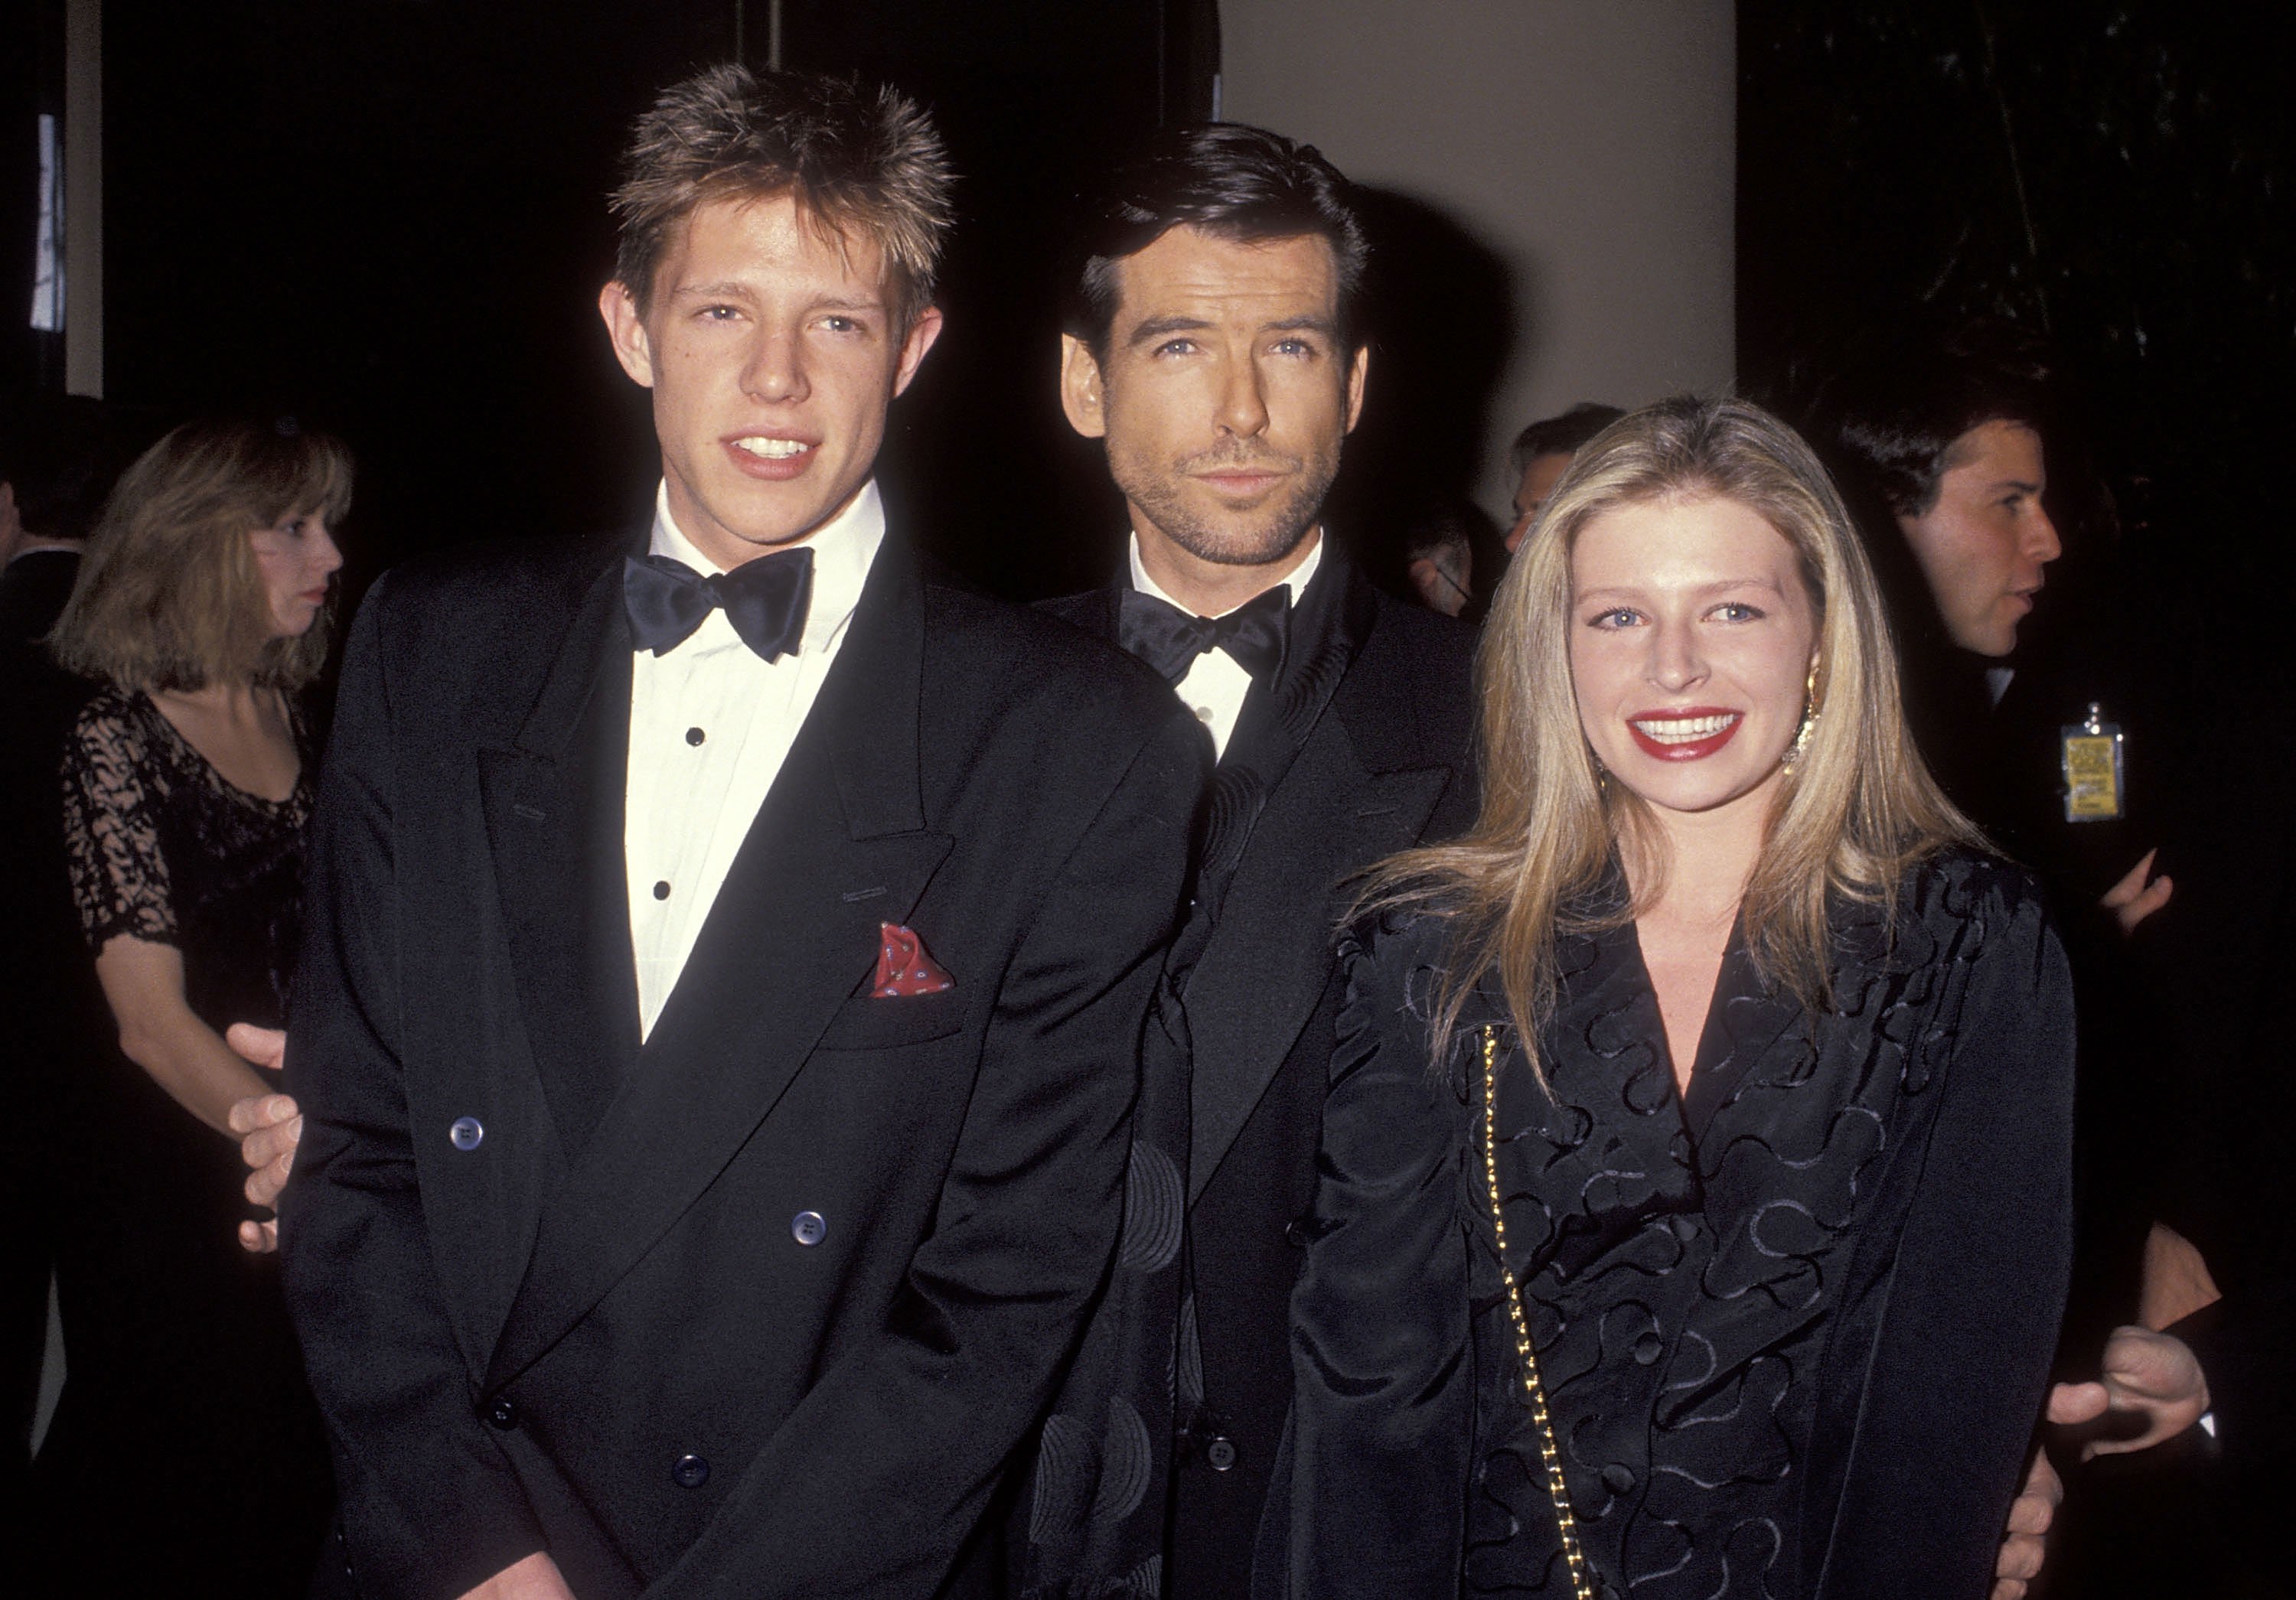 Actor Pierce Brosnan, son Christopher Brosnan and daughter Charlotte Brosnan at the 49th Annual Golden Globe Awards on January 18, 1992 at Beverly Hilton Hotel in Beverly Hills, California. | Source: Getty Images